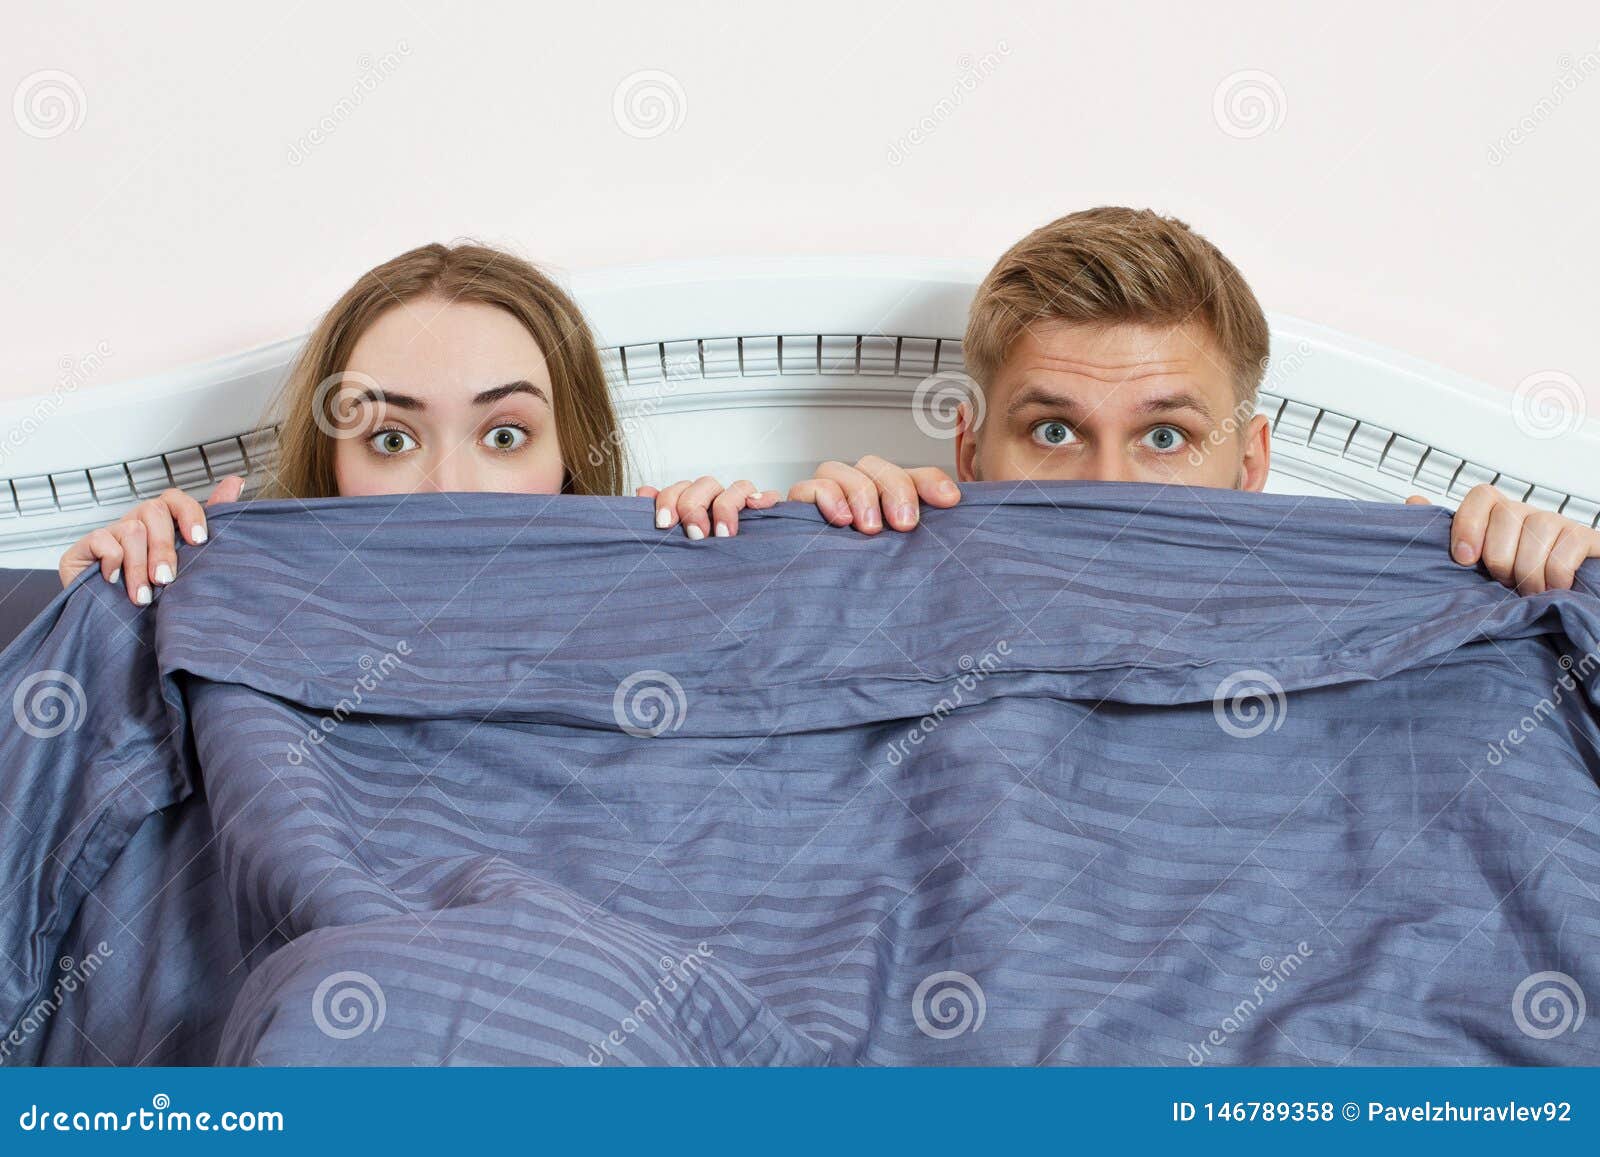 Adult Couple Hiding Under Blanket In Bed Couple In B